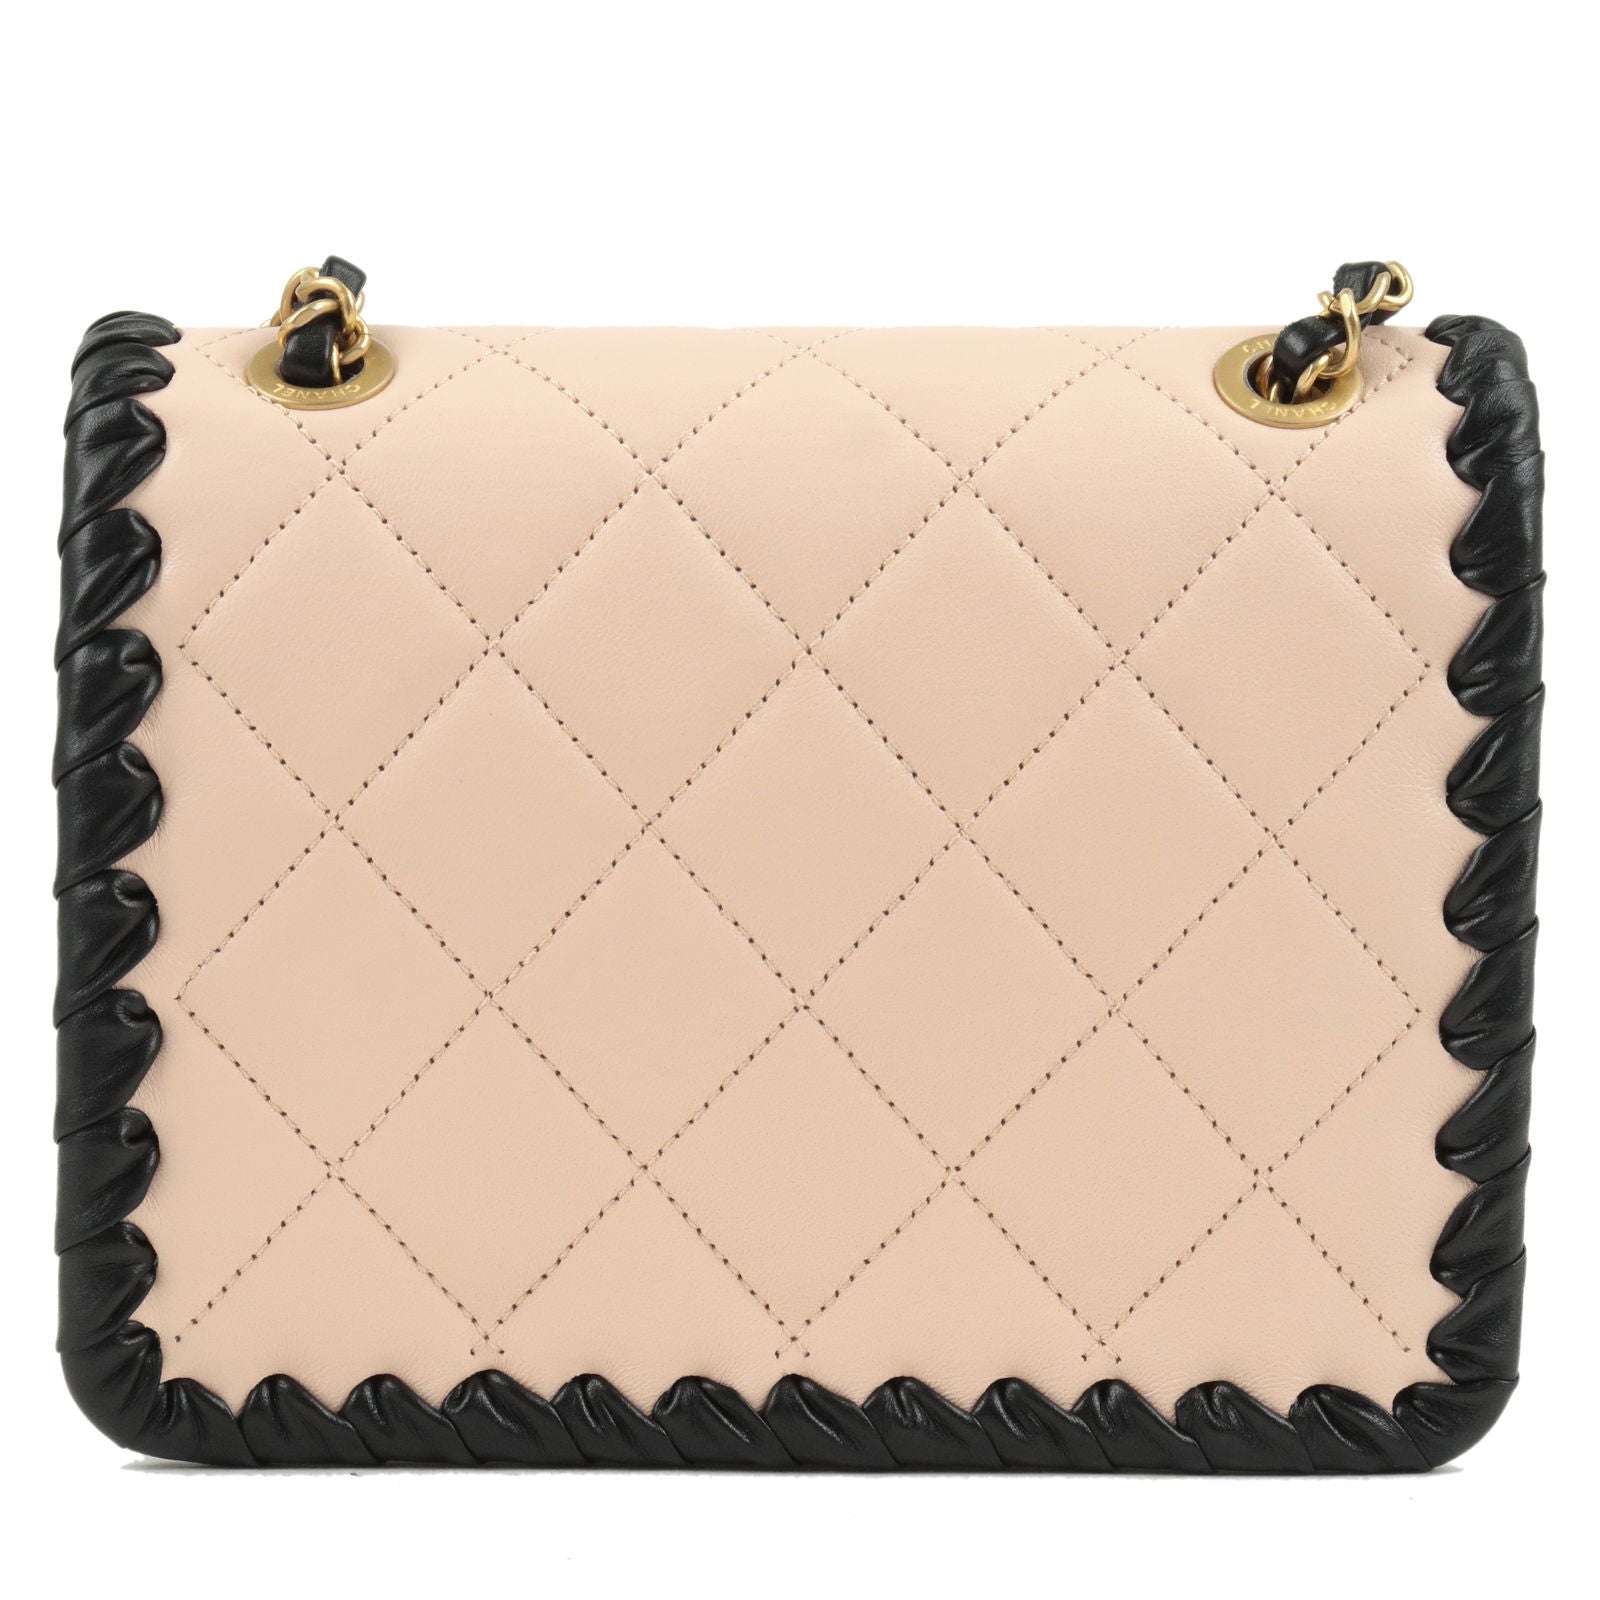 Sold at Auction: Chanel Beige/Black Bar Quilted Patent East West Flap Bag